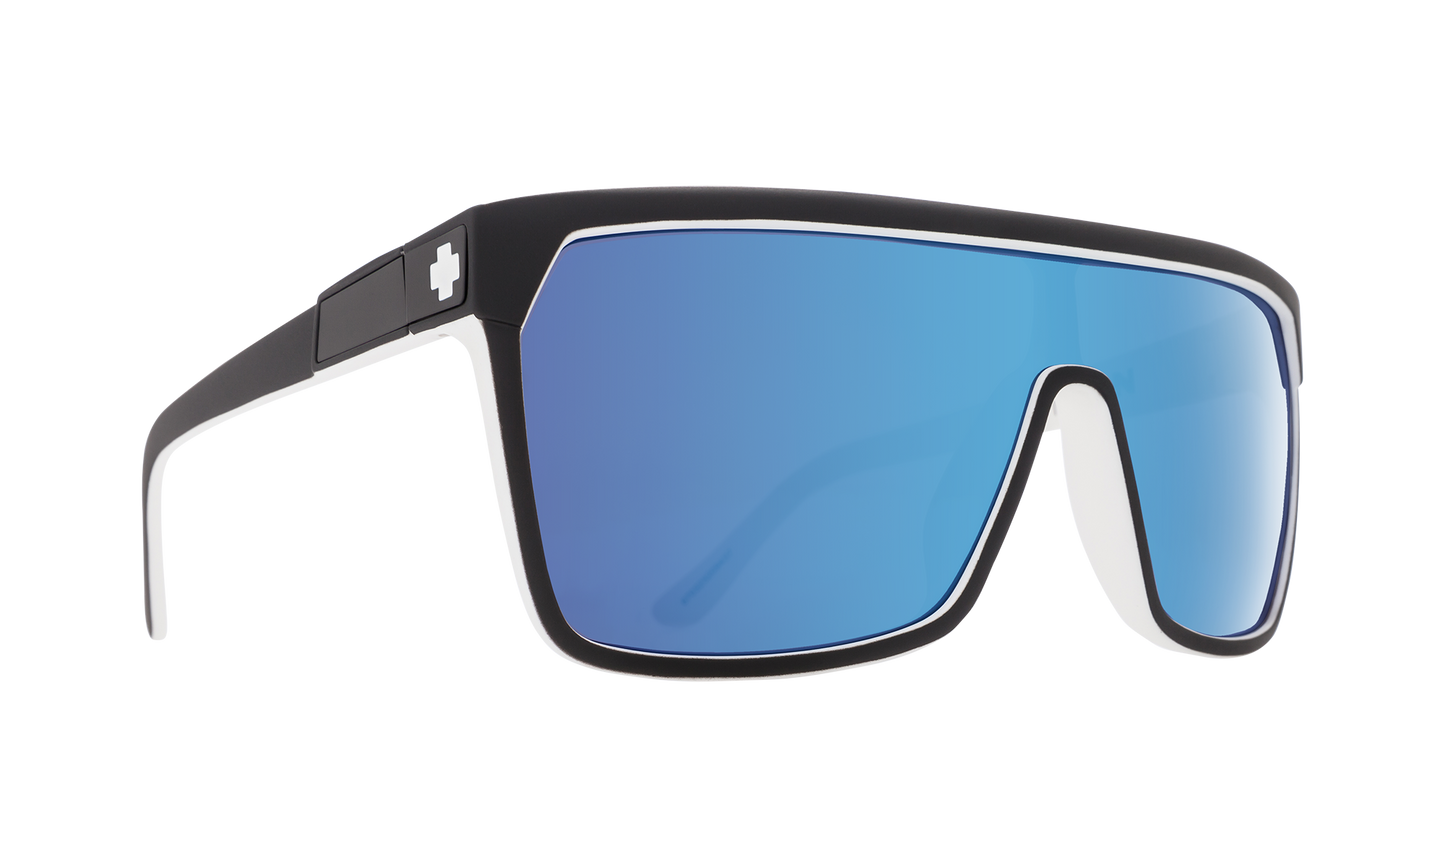 SPY Flynn Sunglasses  Happy Gray Green with Light Blue Spectra Whitewall  a whopping 134-00-140